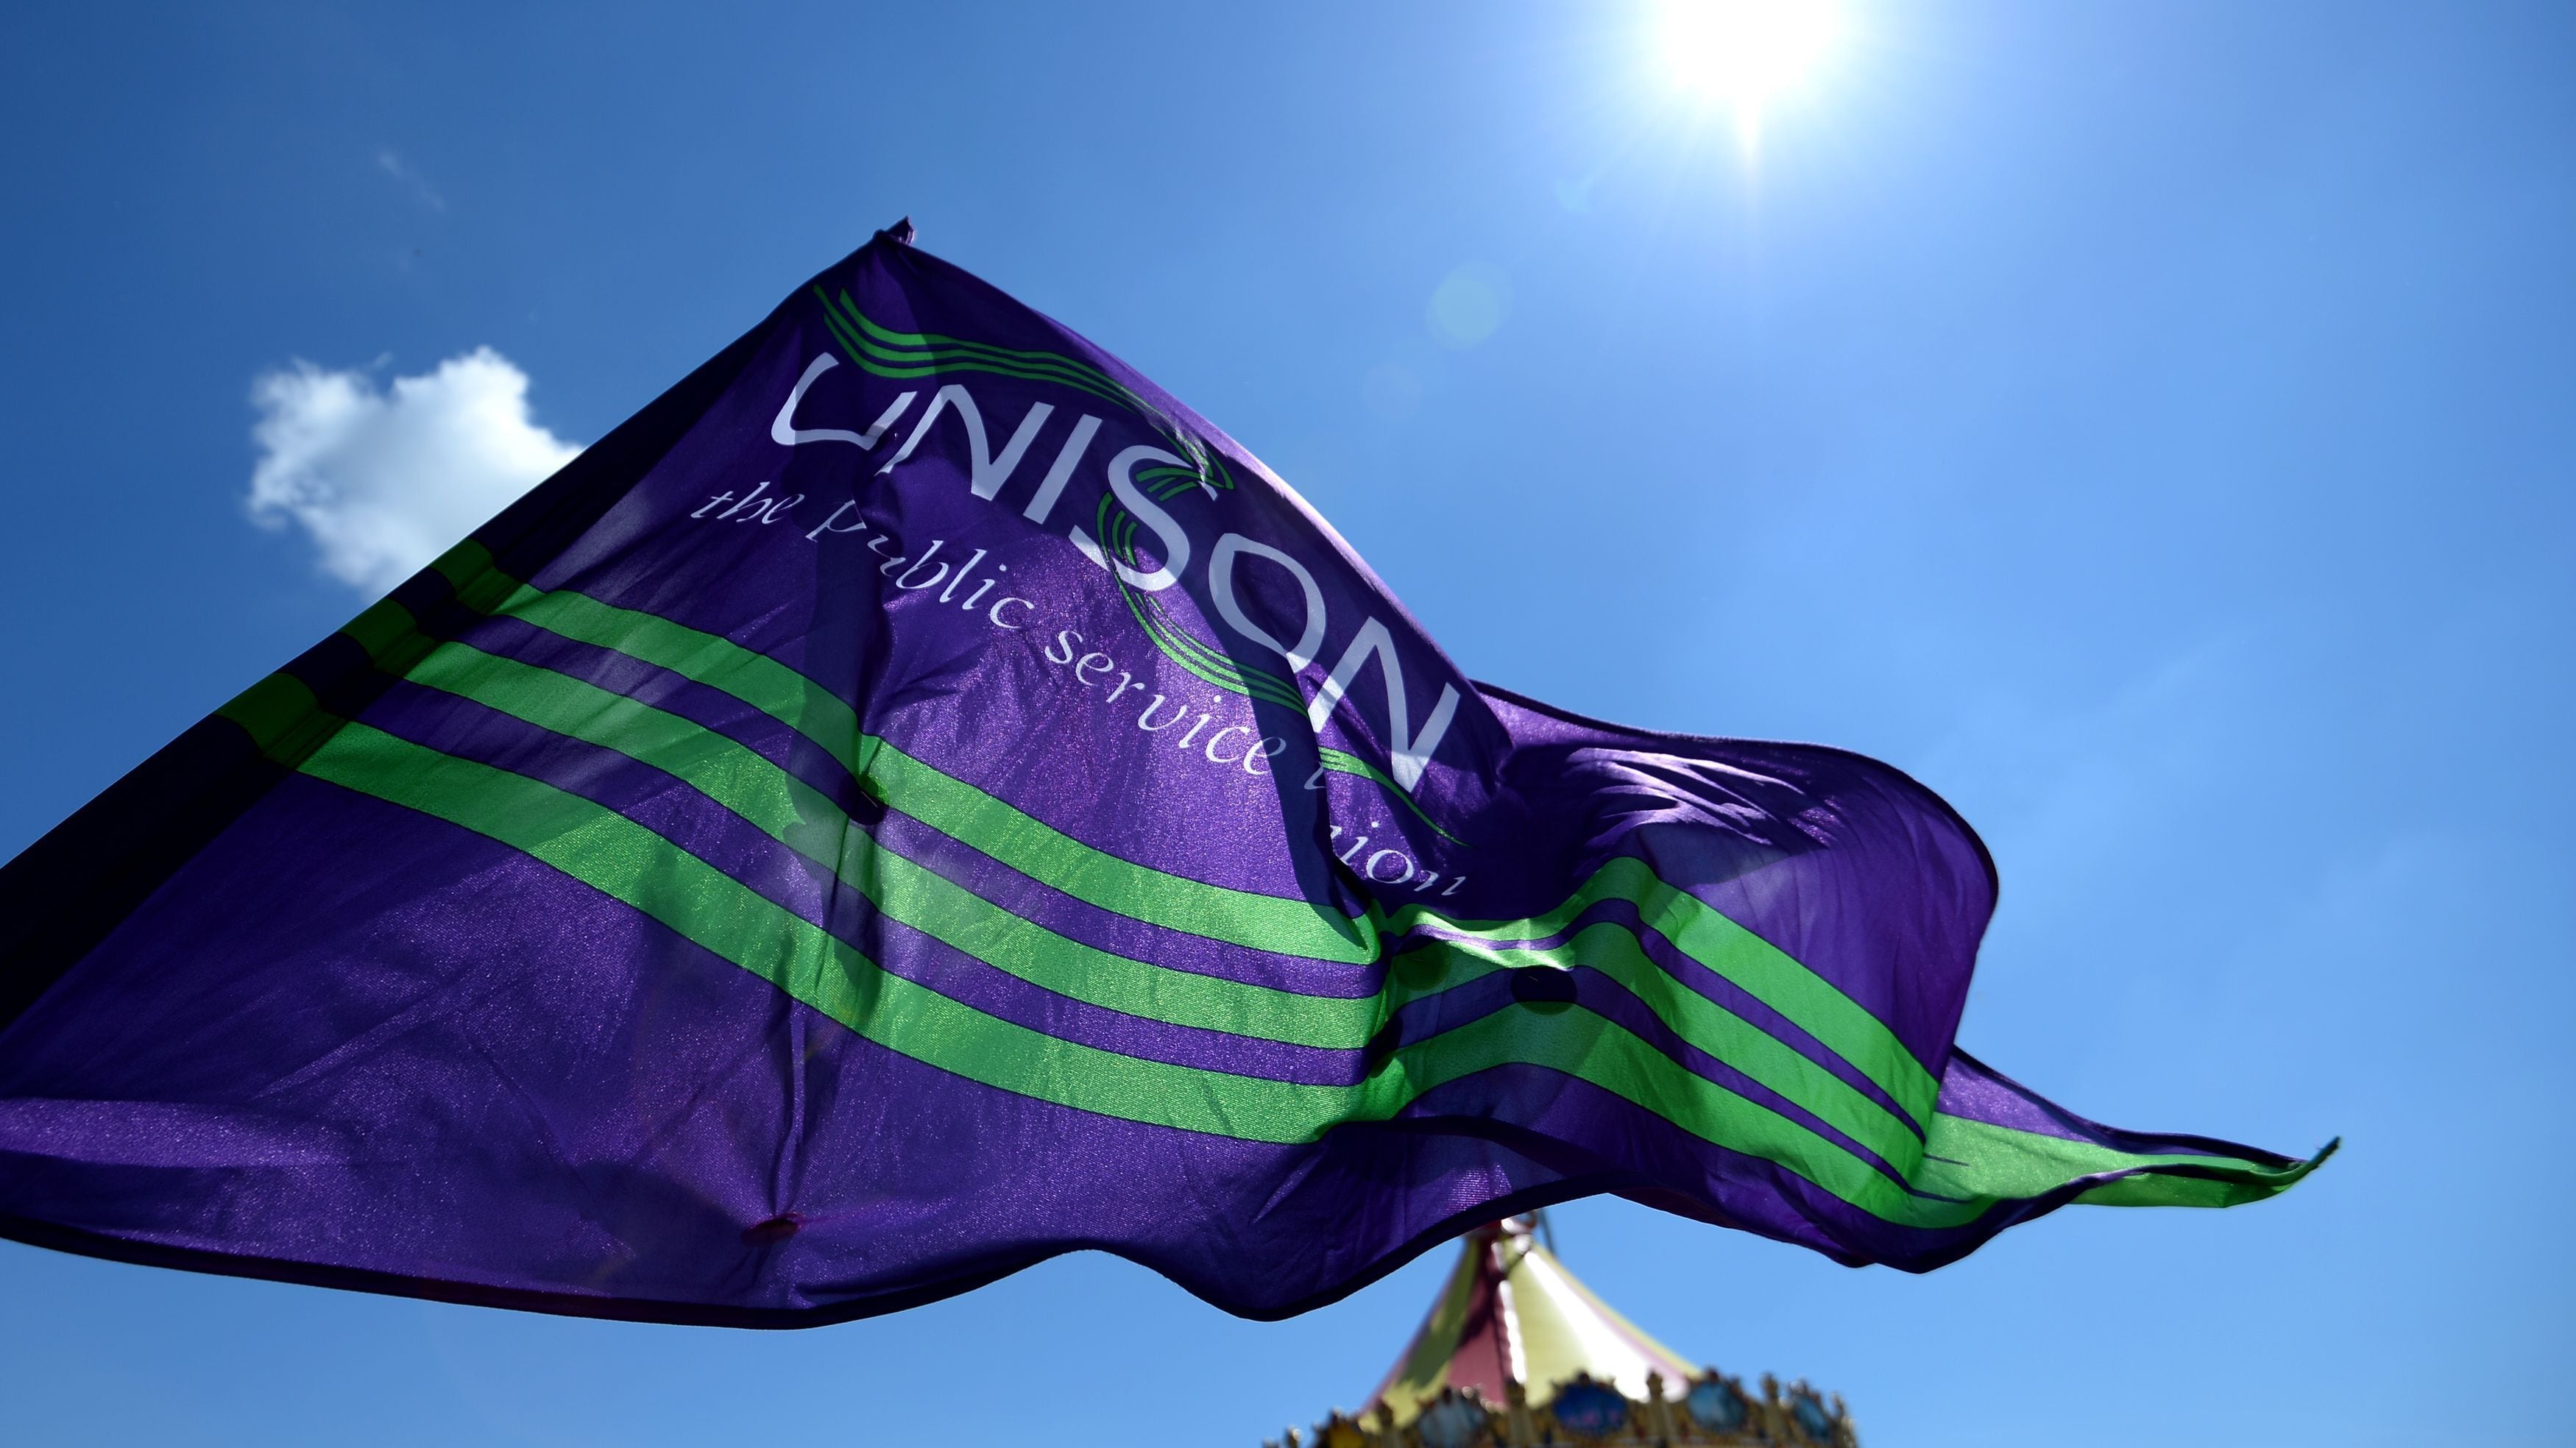 Unison said the latest Cosla offer ‘does nothing’ to address a fall in the value of wages over the last 14 years